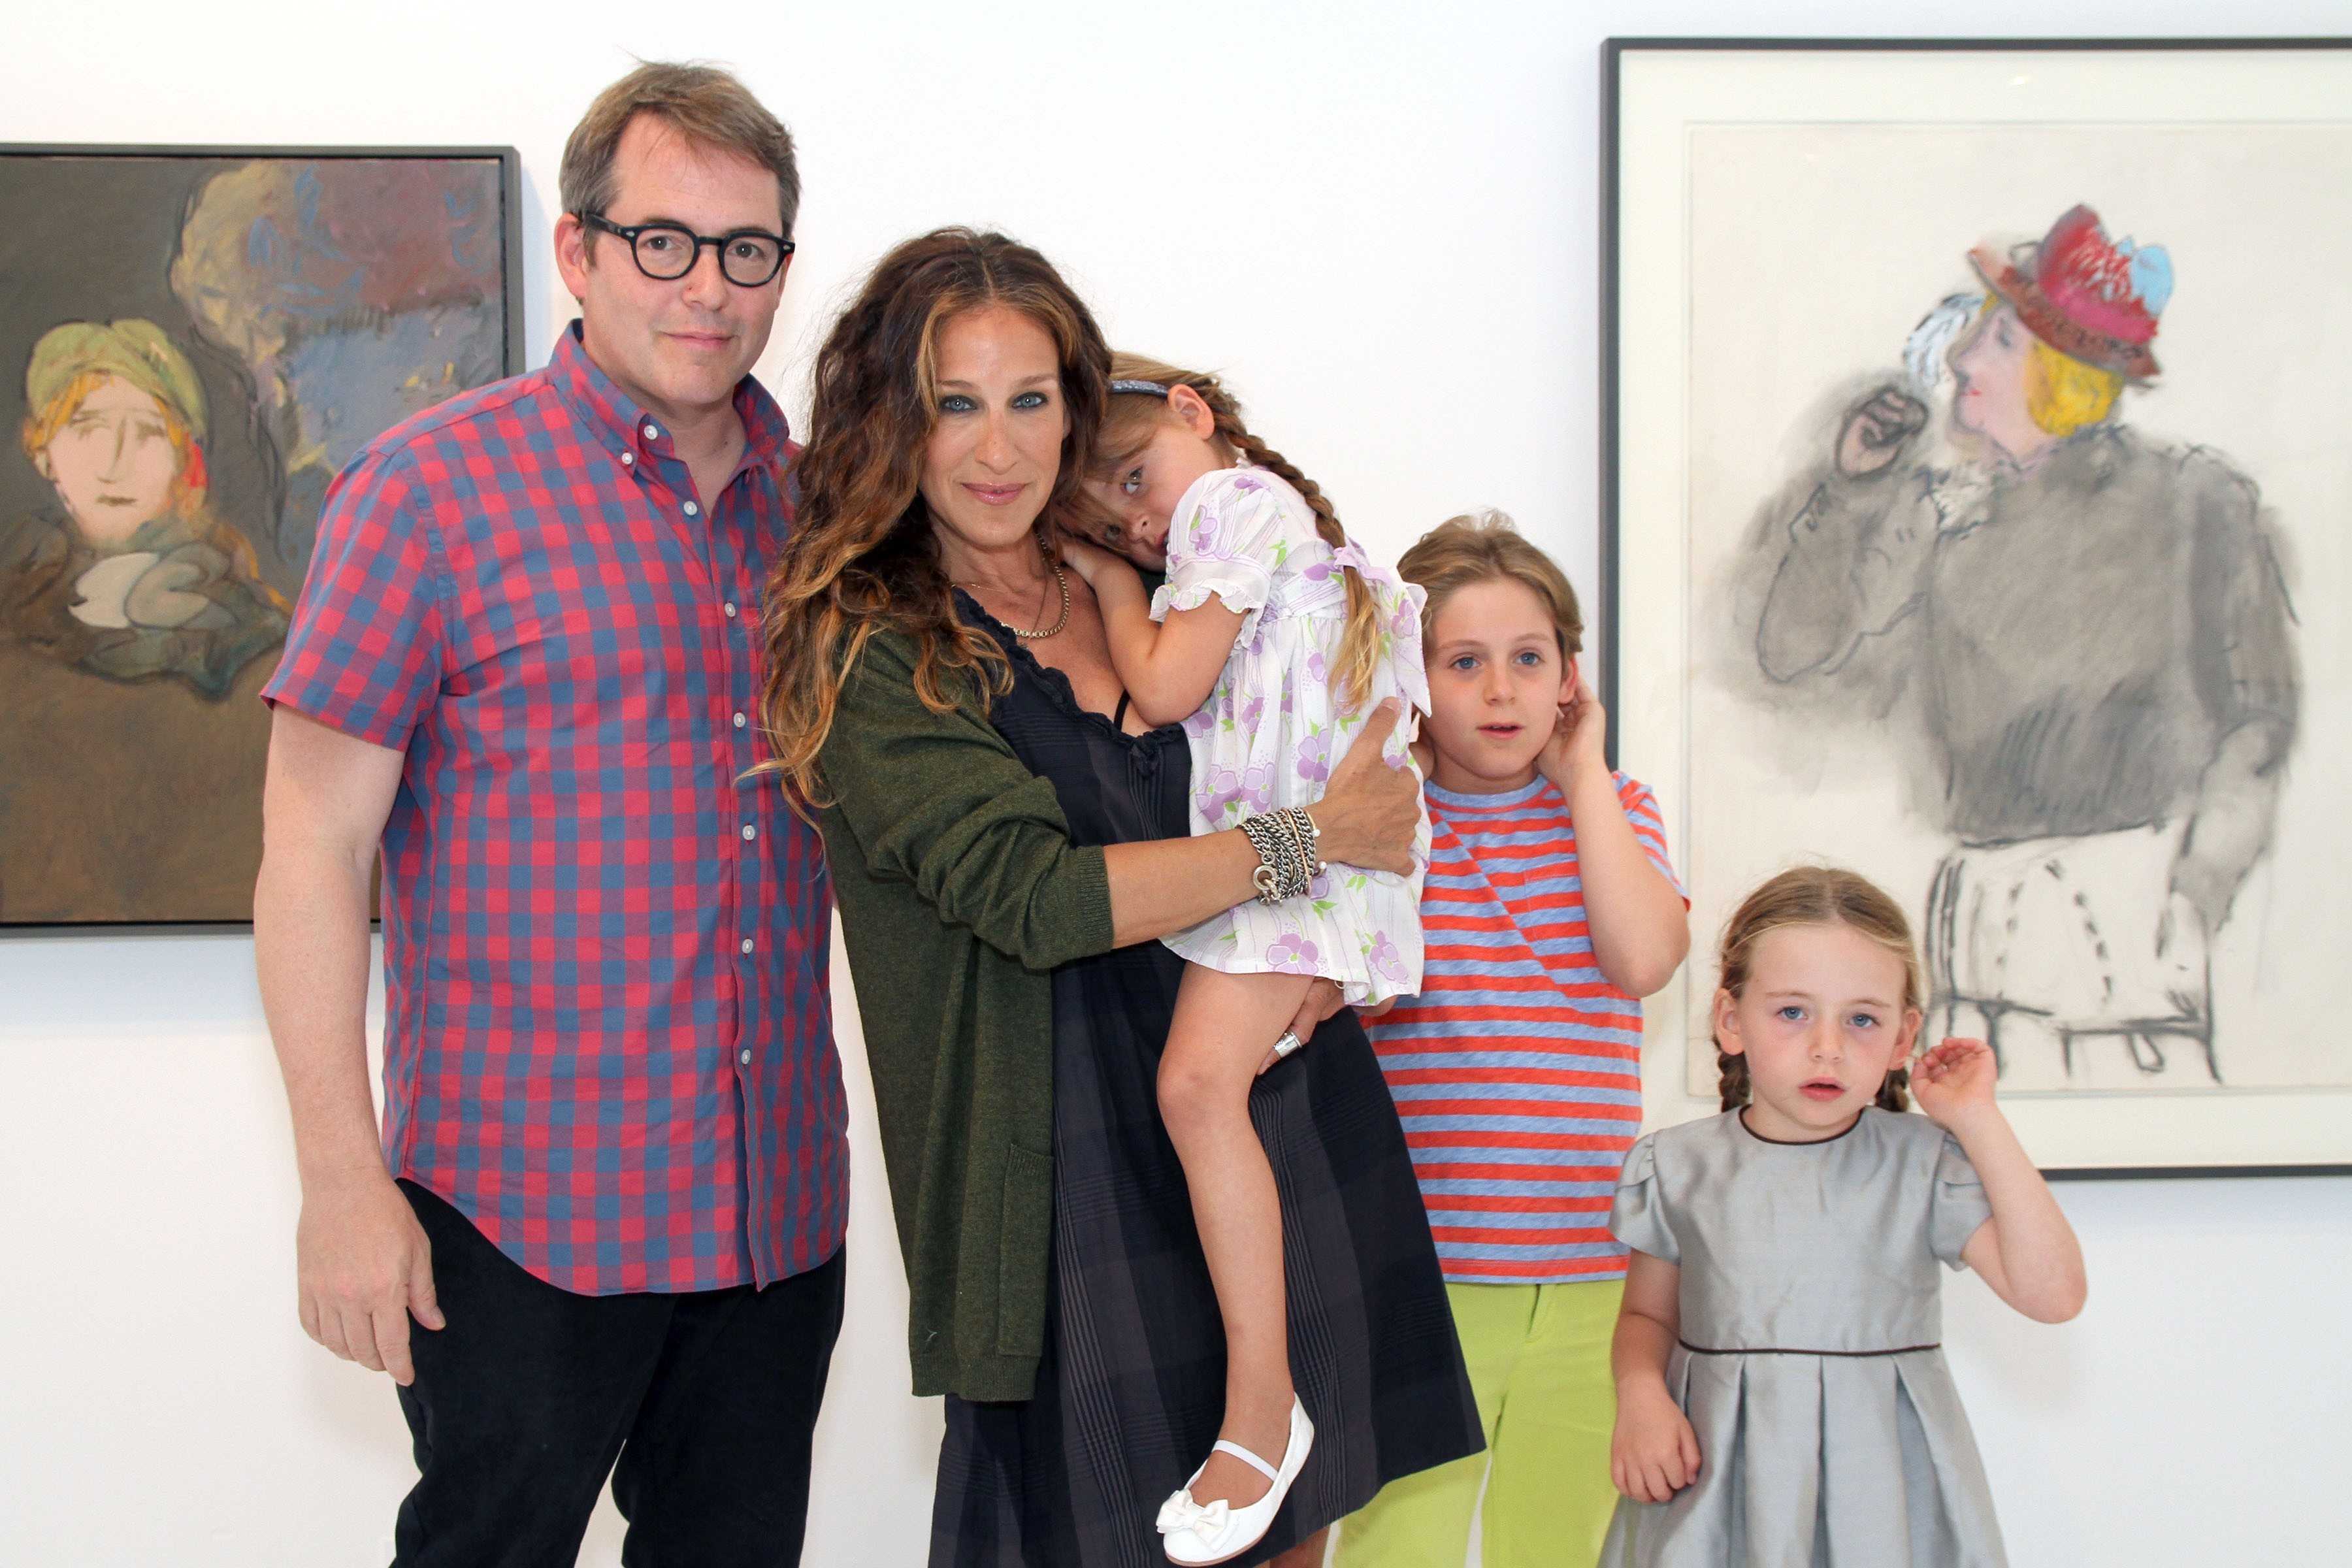 Matthew Broderick and Sarah Jessica Parker, Tabitha, James, and Marion Broderick in Amagansett, New York on July 12, 2014 | Source: Getty Images